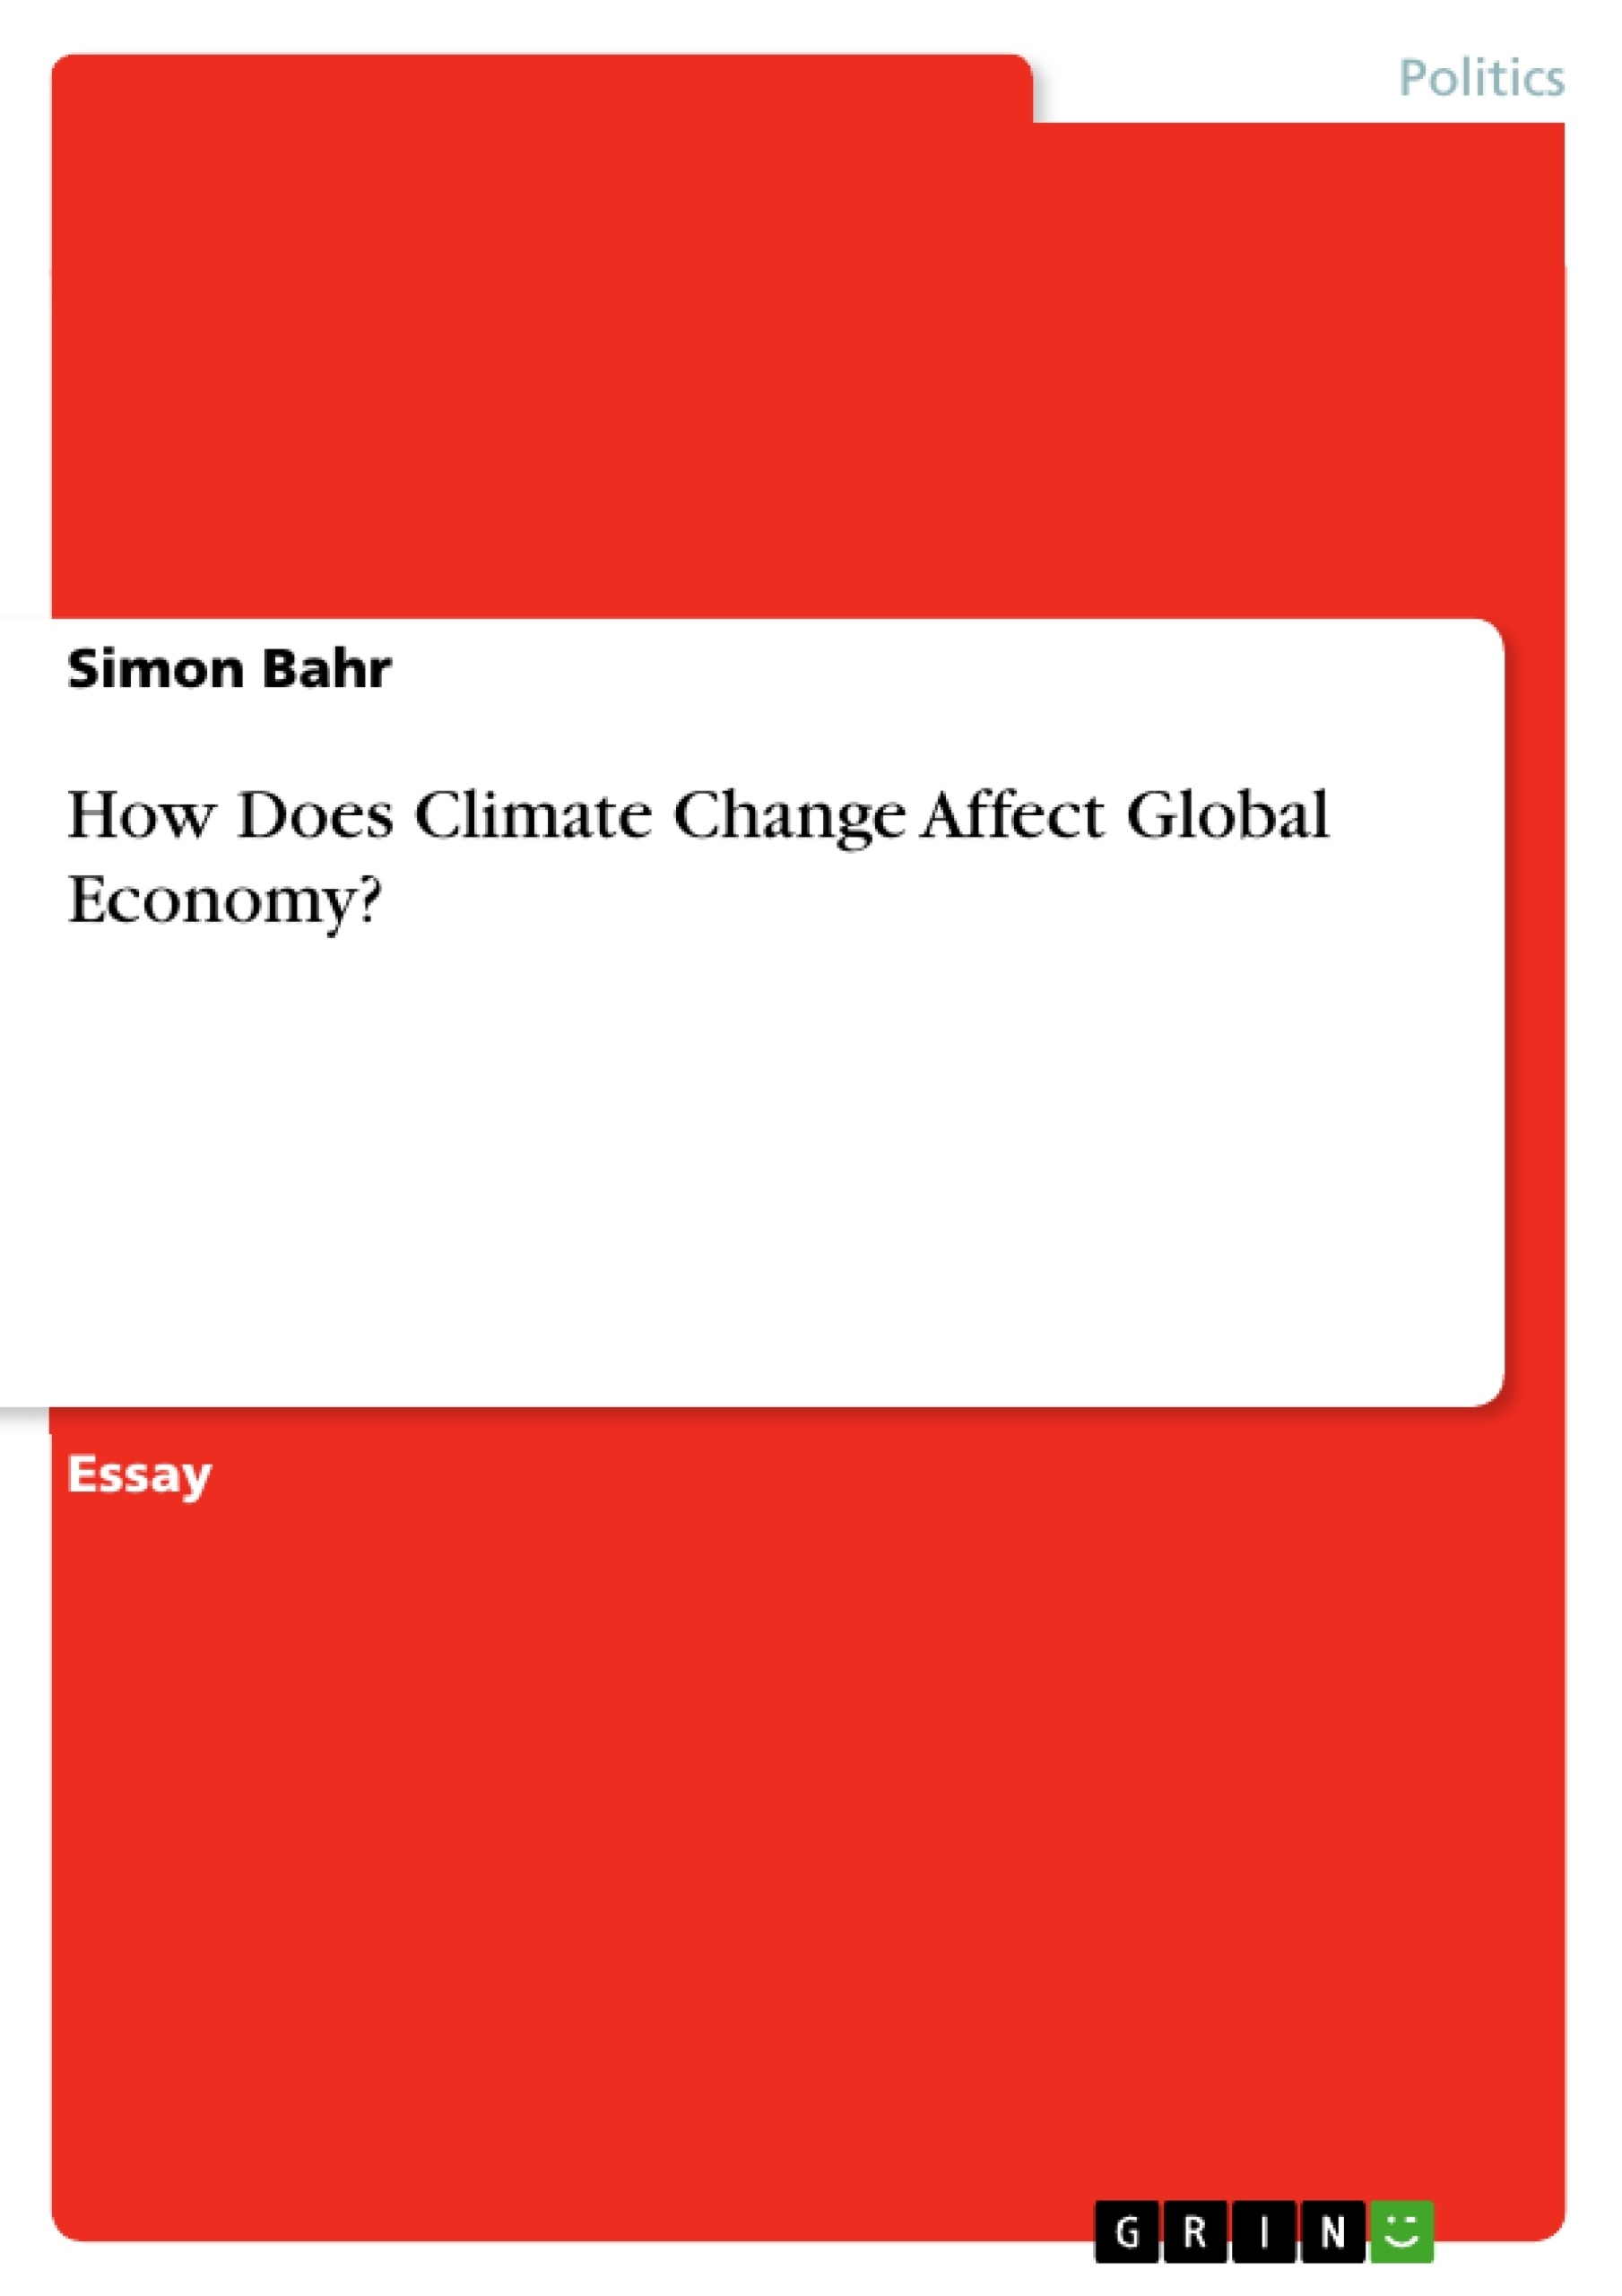 Title: How Does Climate Change Affect Global Economy?